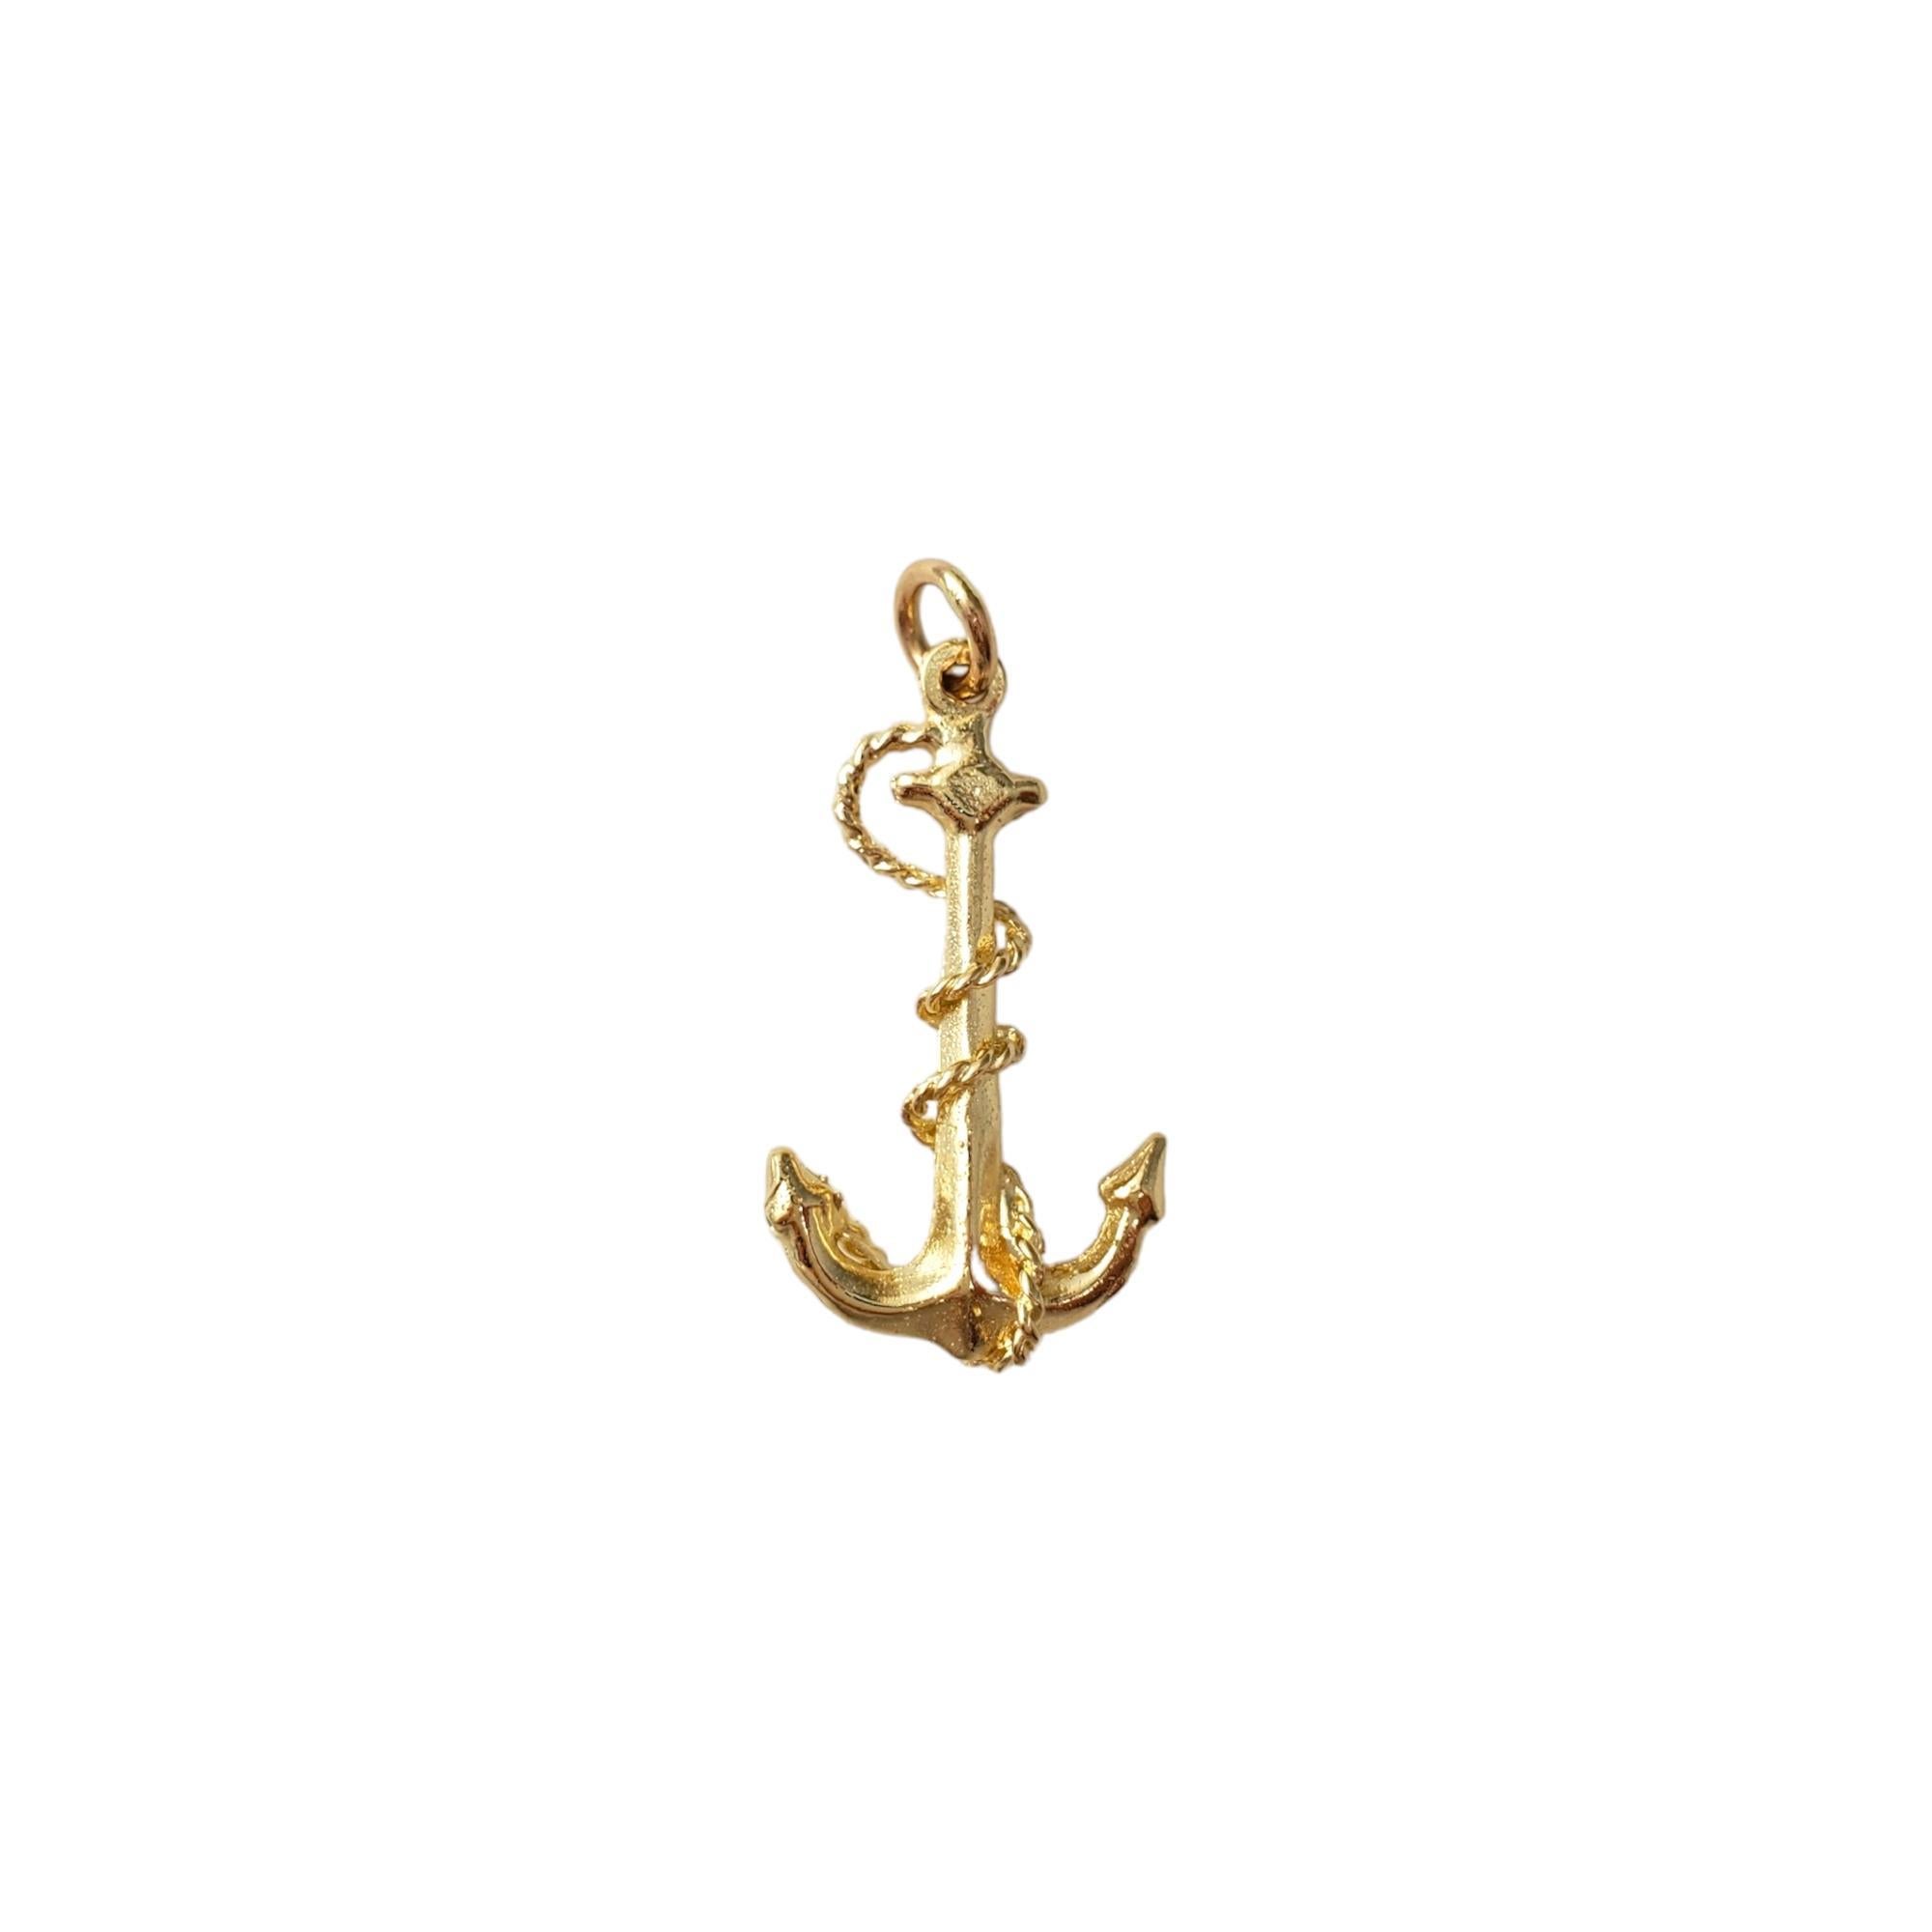 Vintage 14K Yellow Gold Anchor Charm -

This elegant charm is crafted in meticulously detailed solid 14K yellow gold. 
 
Size:  27.43mm X 2.95mm

Weight:  1.6dwt. /  2.5 gr.

Marked: 14K

Very good condition, professionally polished.

Will come